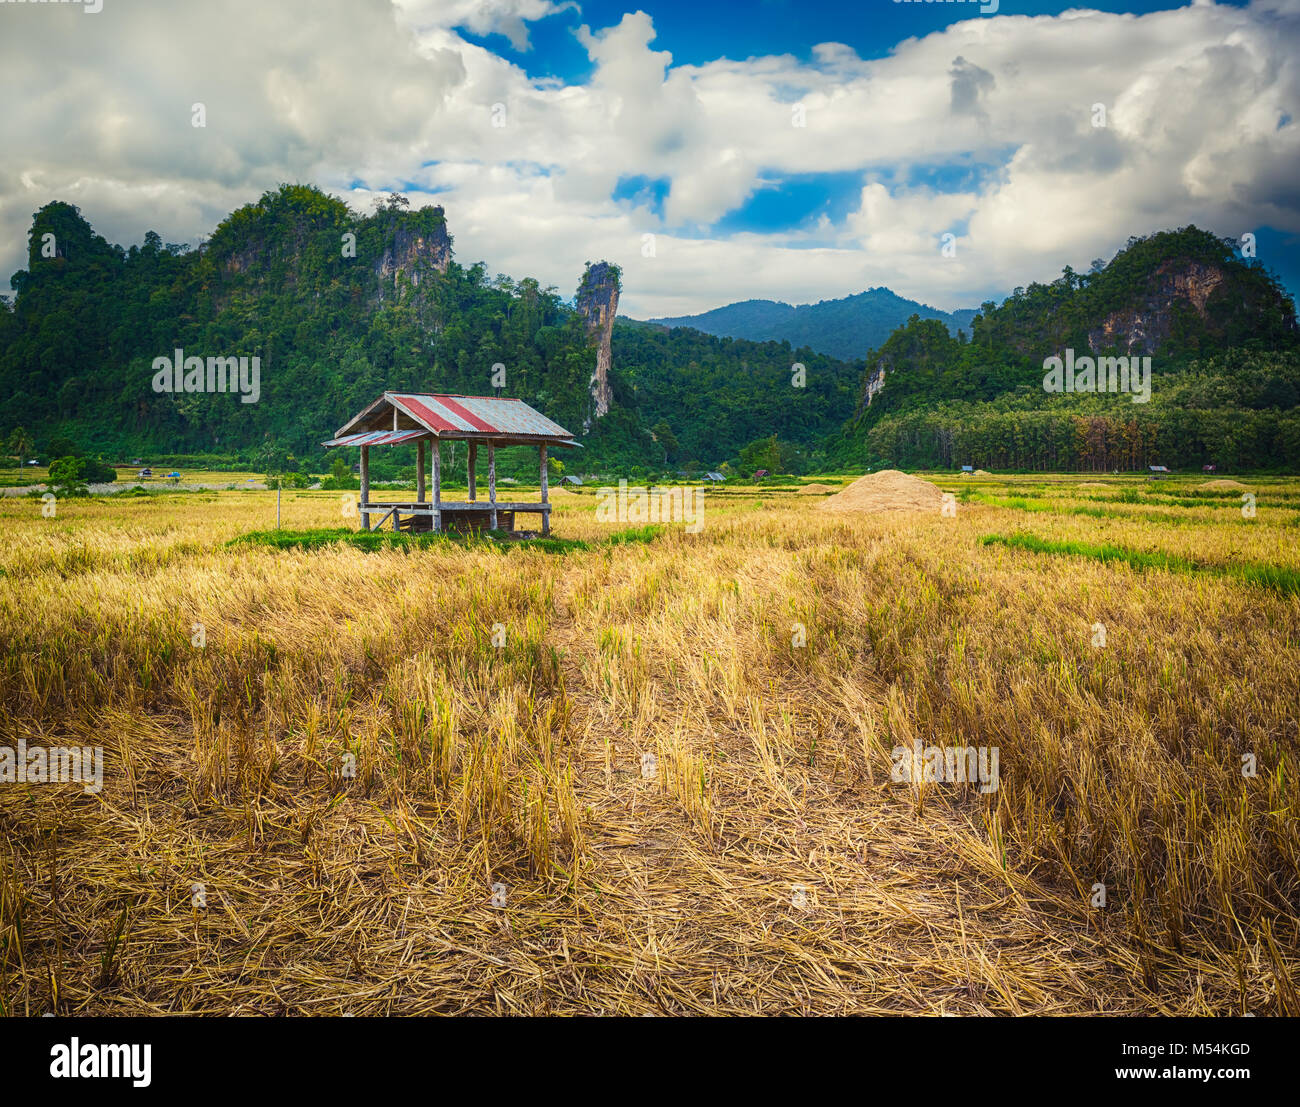 Rice field and mountains. Beautiful rural landscape. Vang Vieng, Laos. Stock Photo